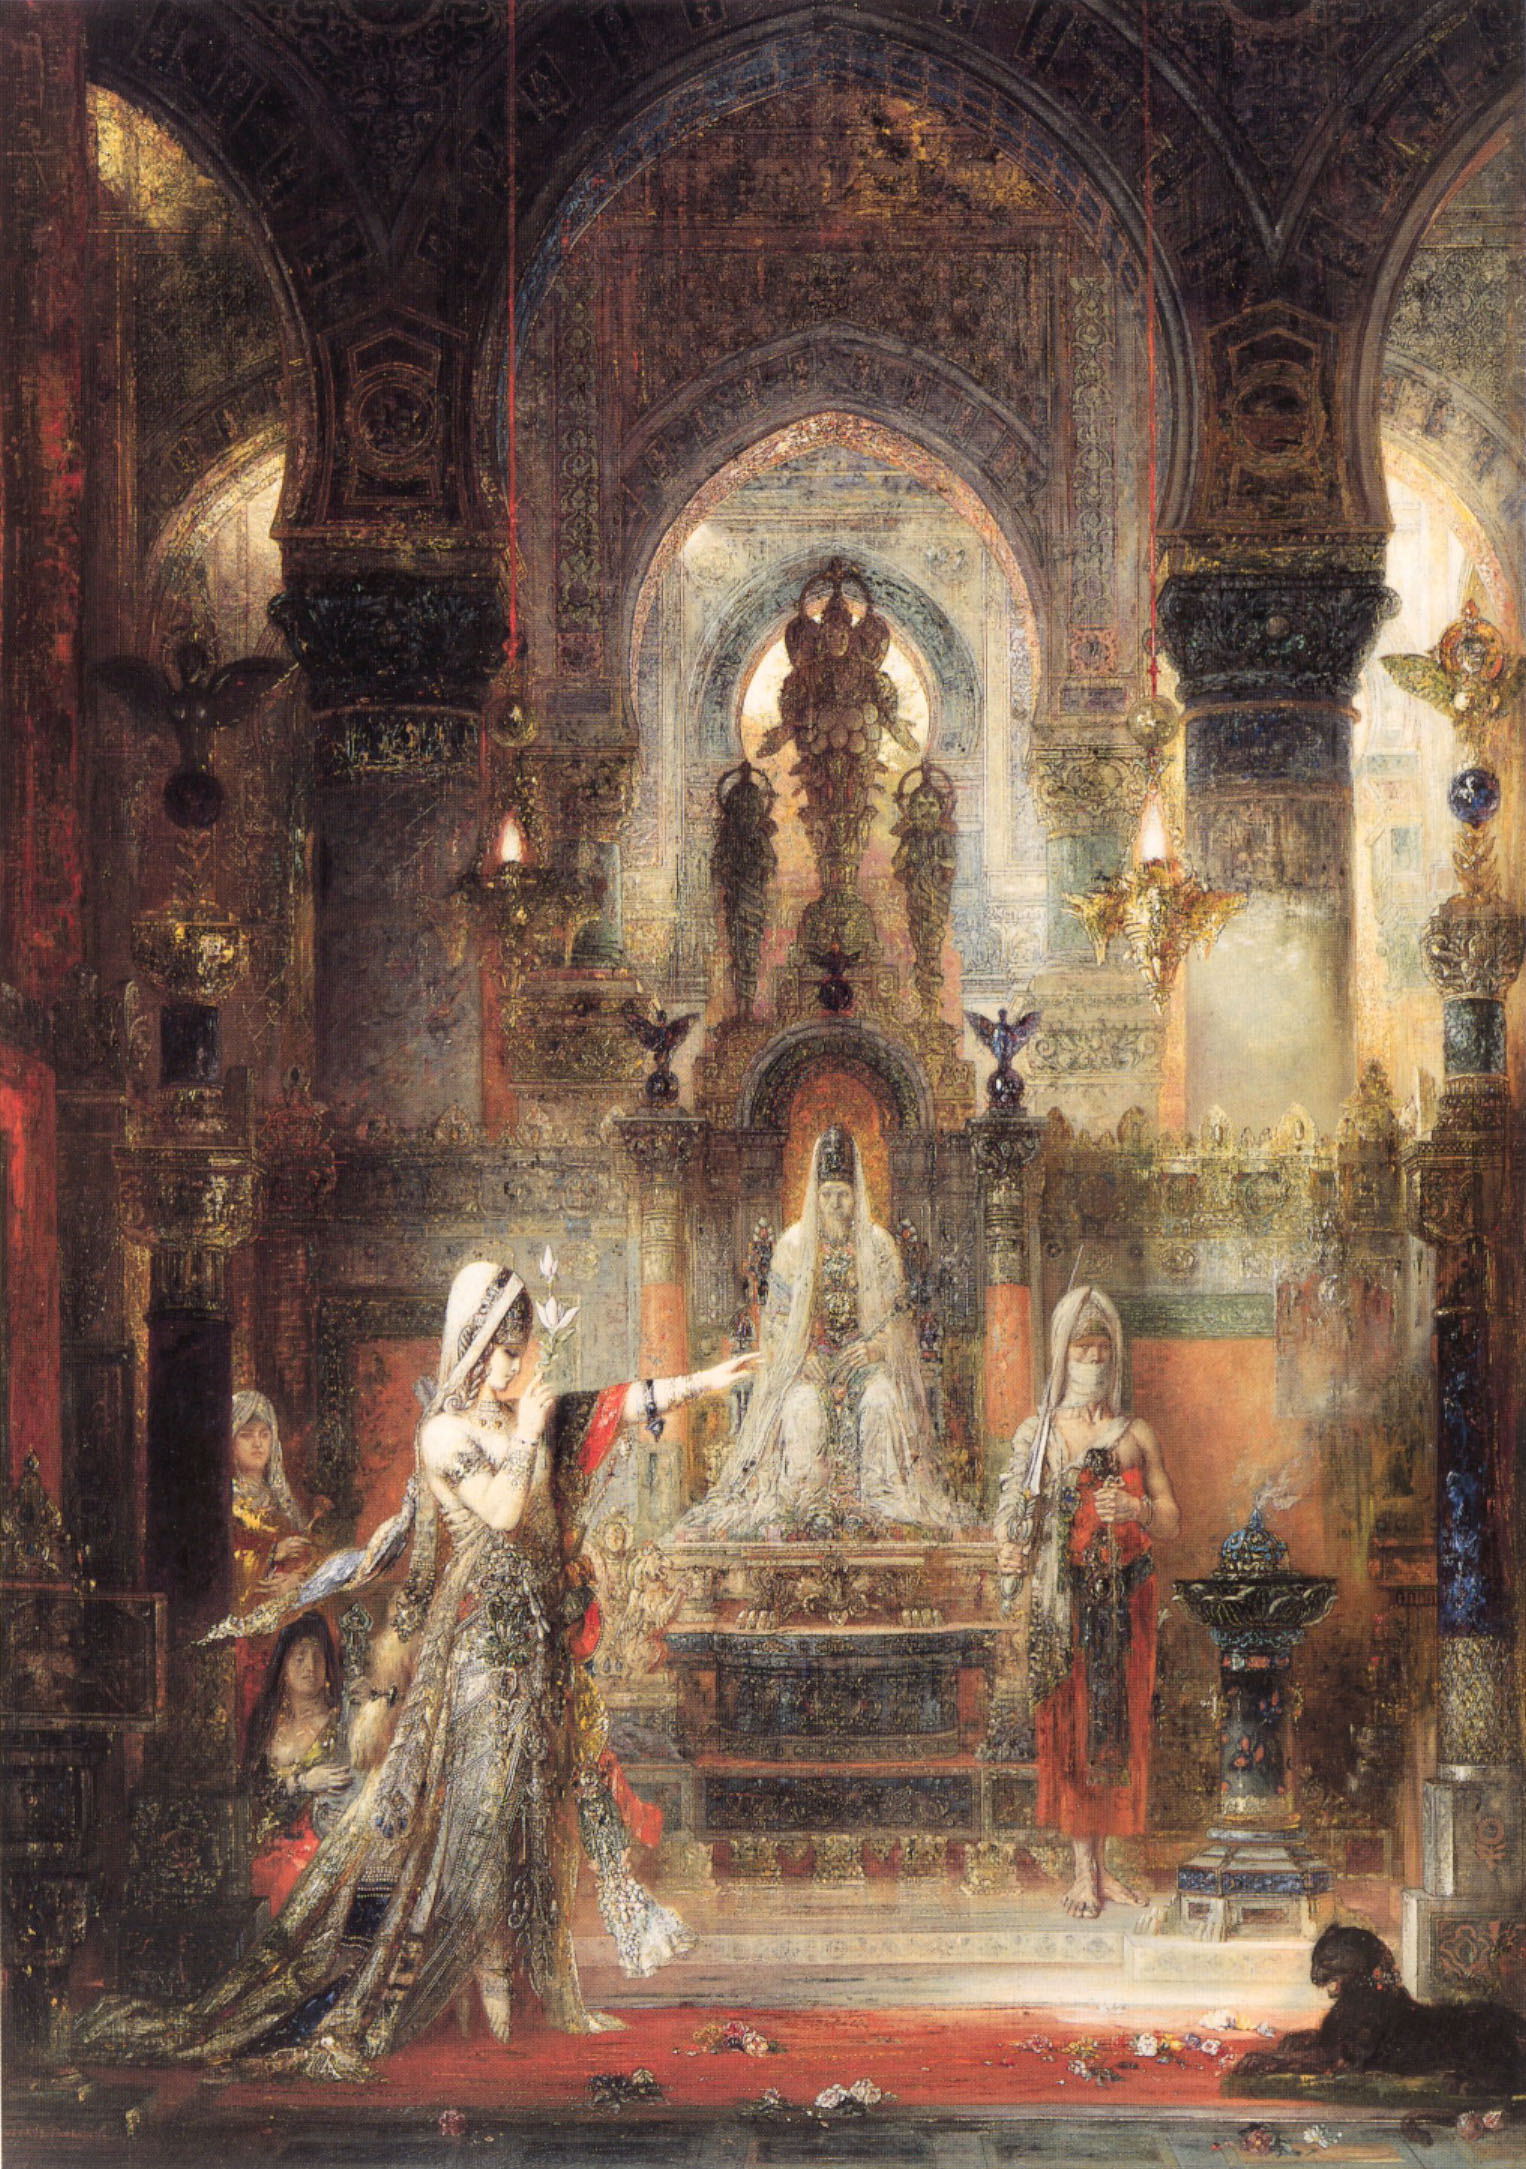 Salome Dancing Before Herod by Gustave Moreau - 1876 - 103.5 x 144 cm Hammer Museum